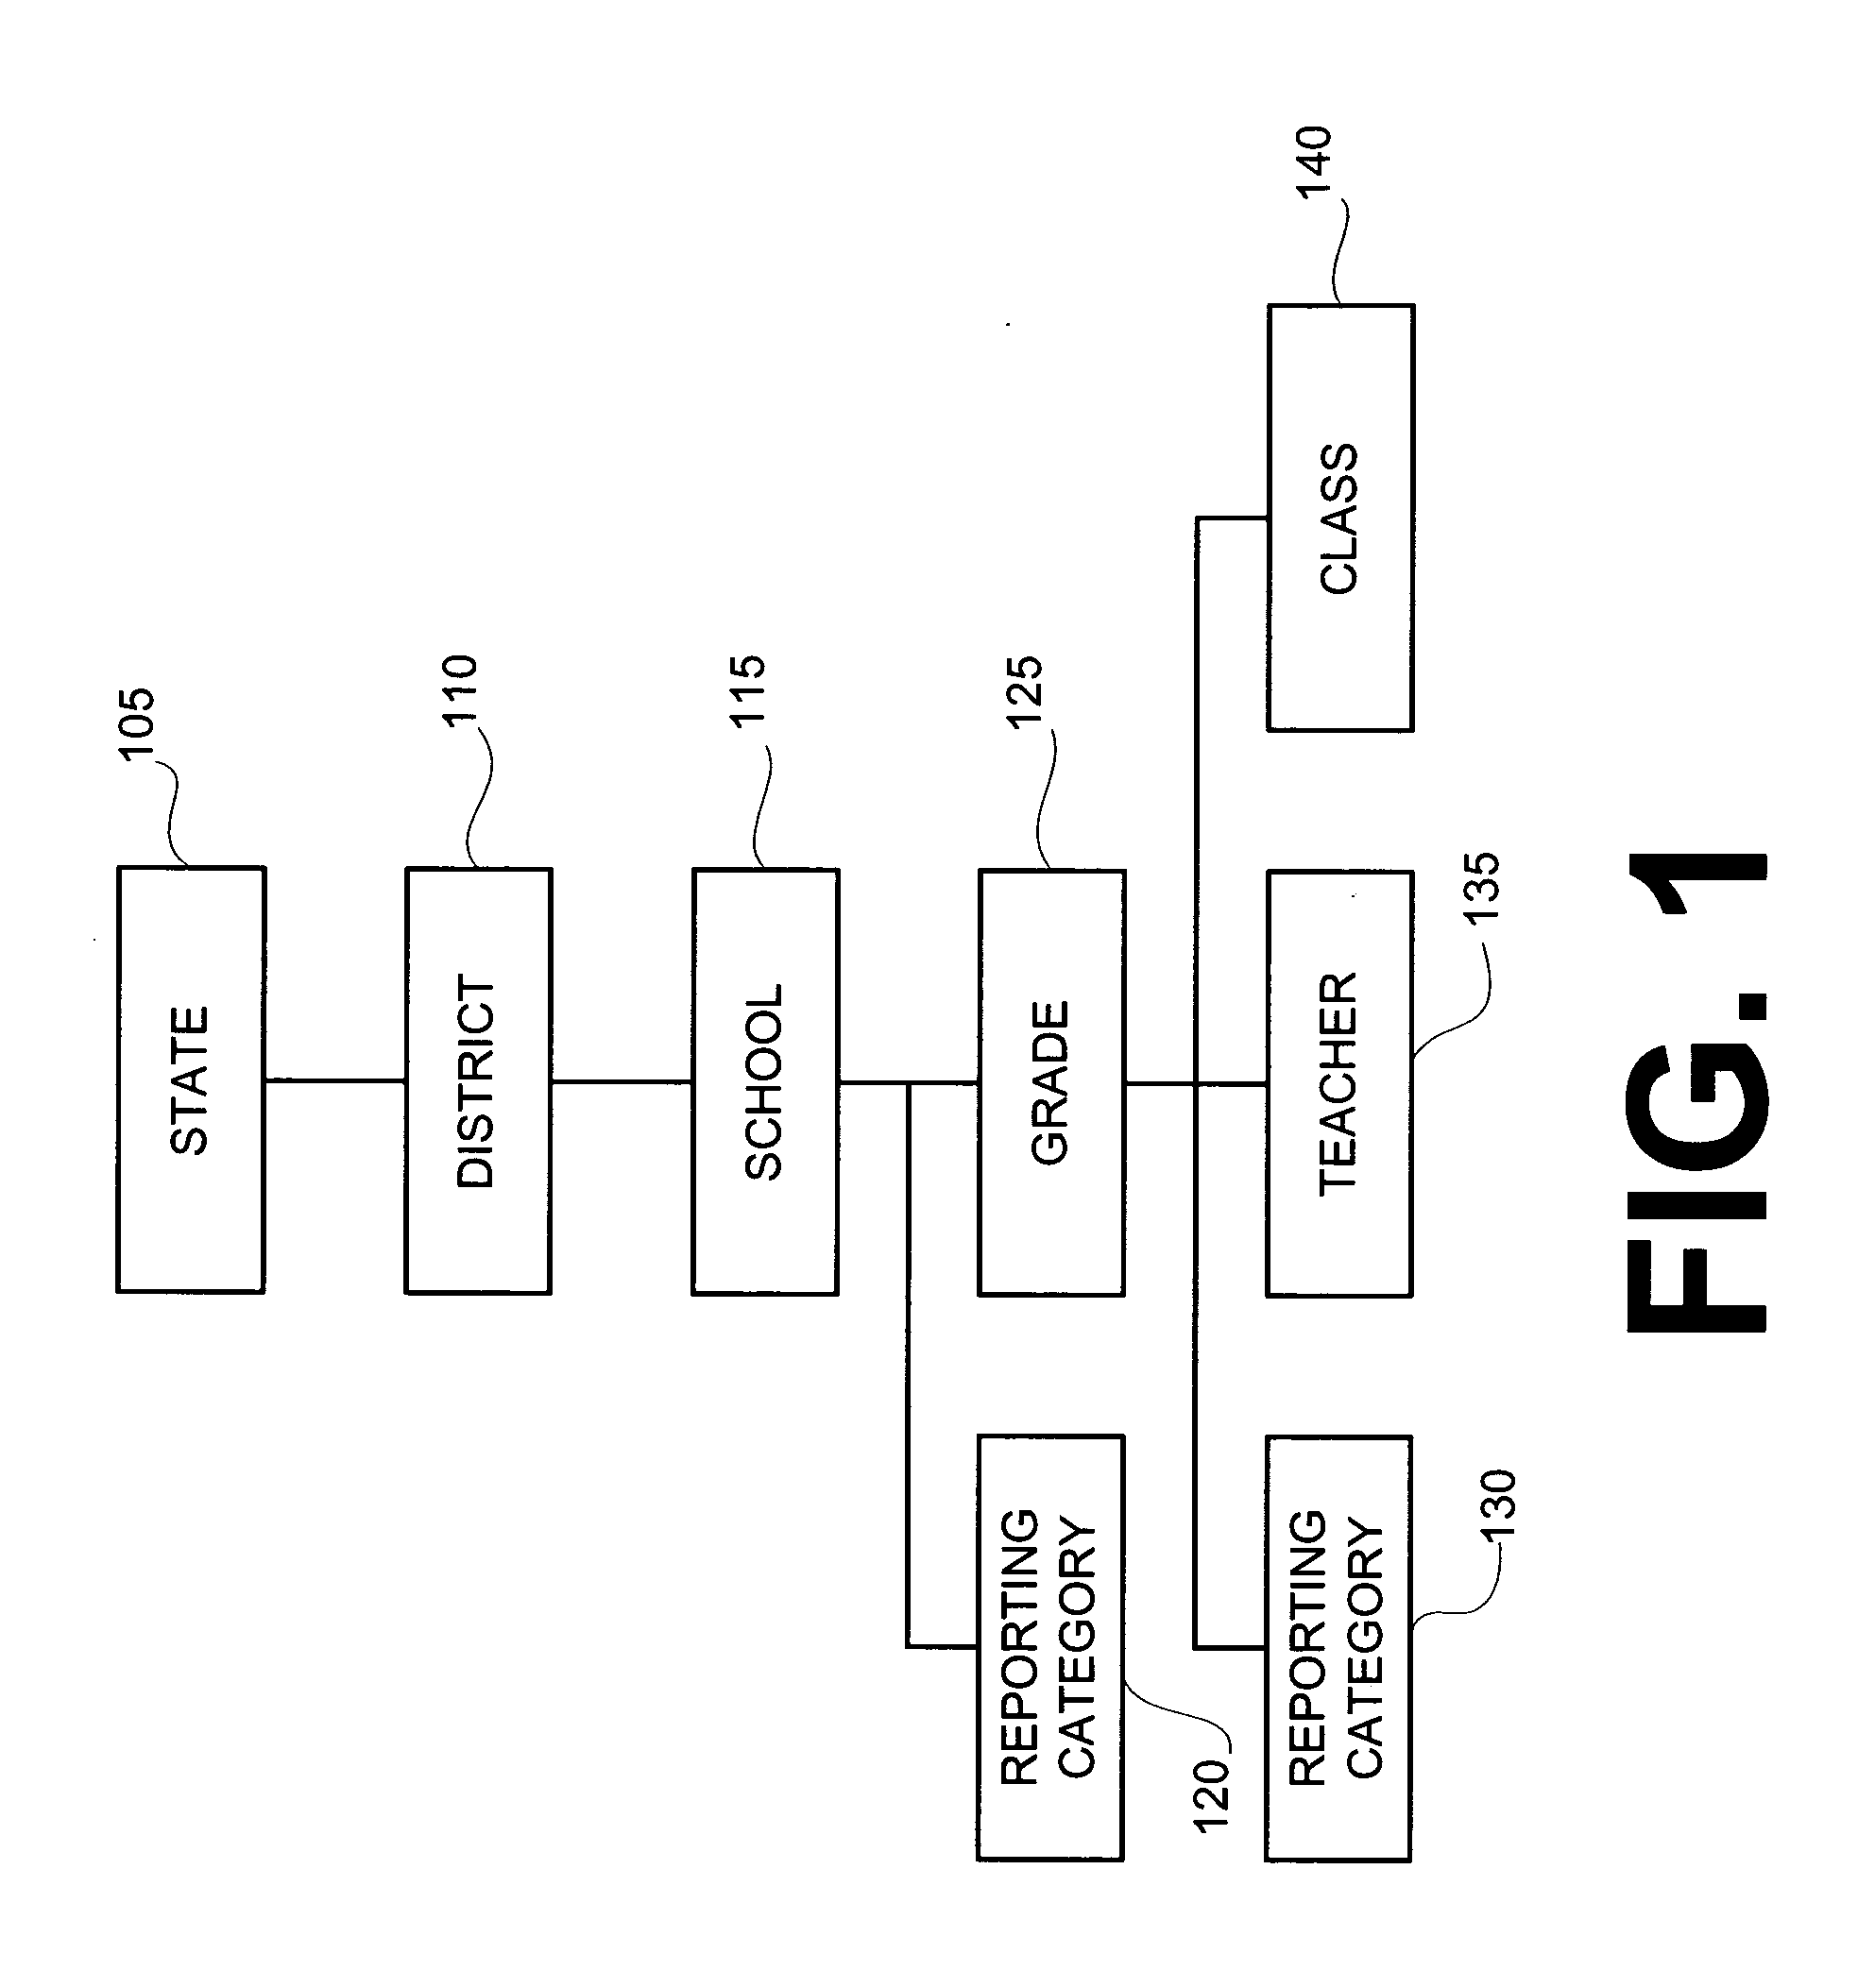 System and method for data analysis and presentation